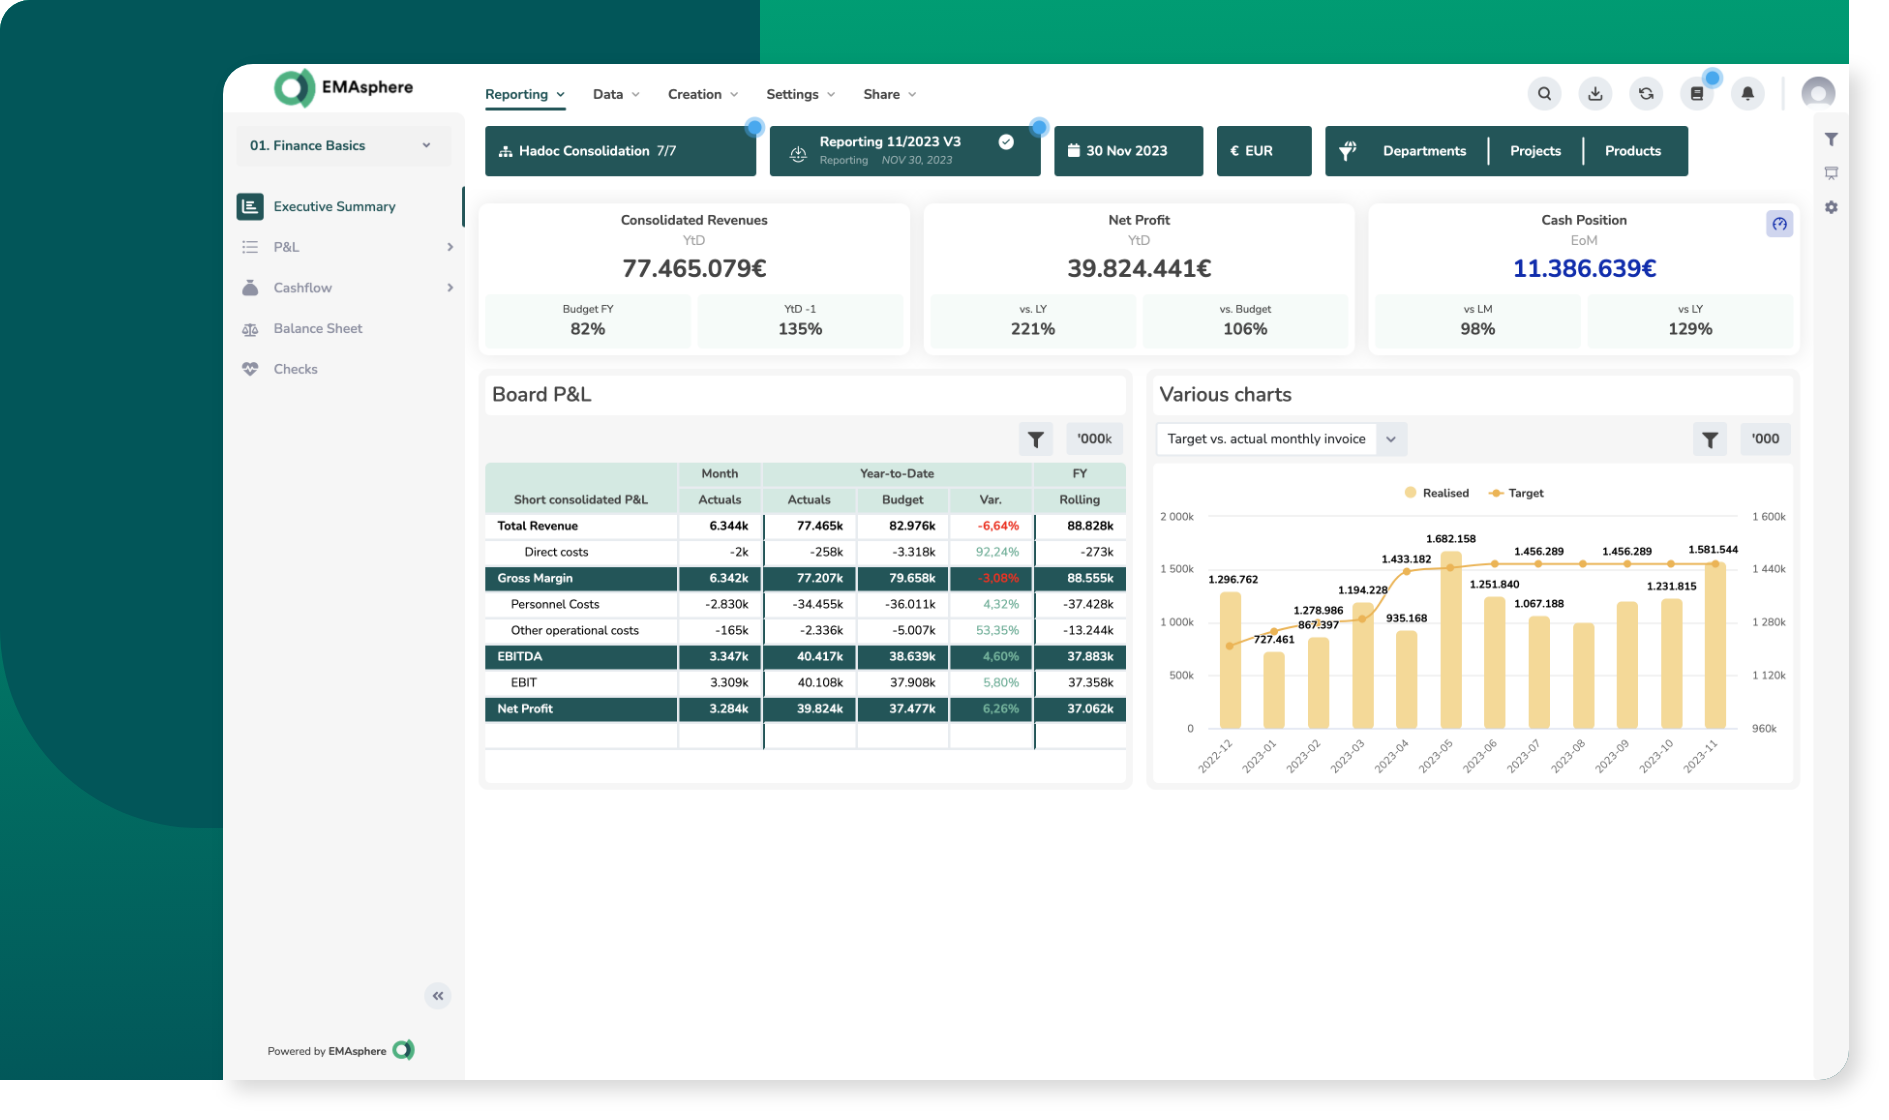 Overview of the financial reporting platform